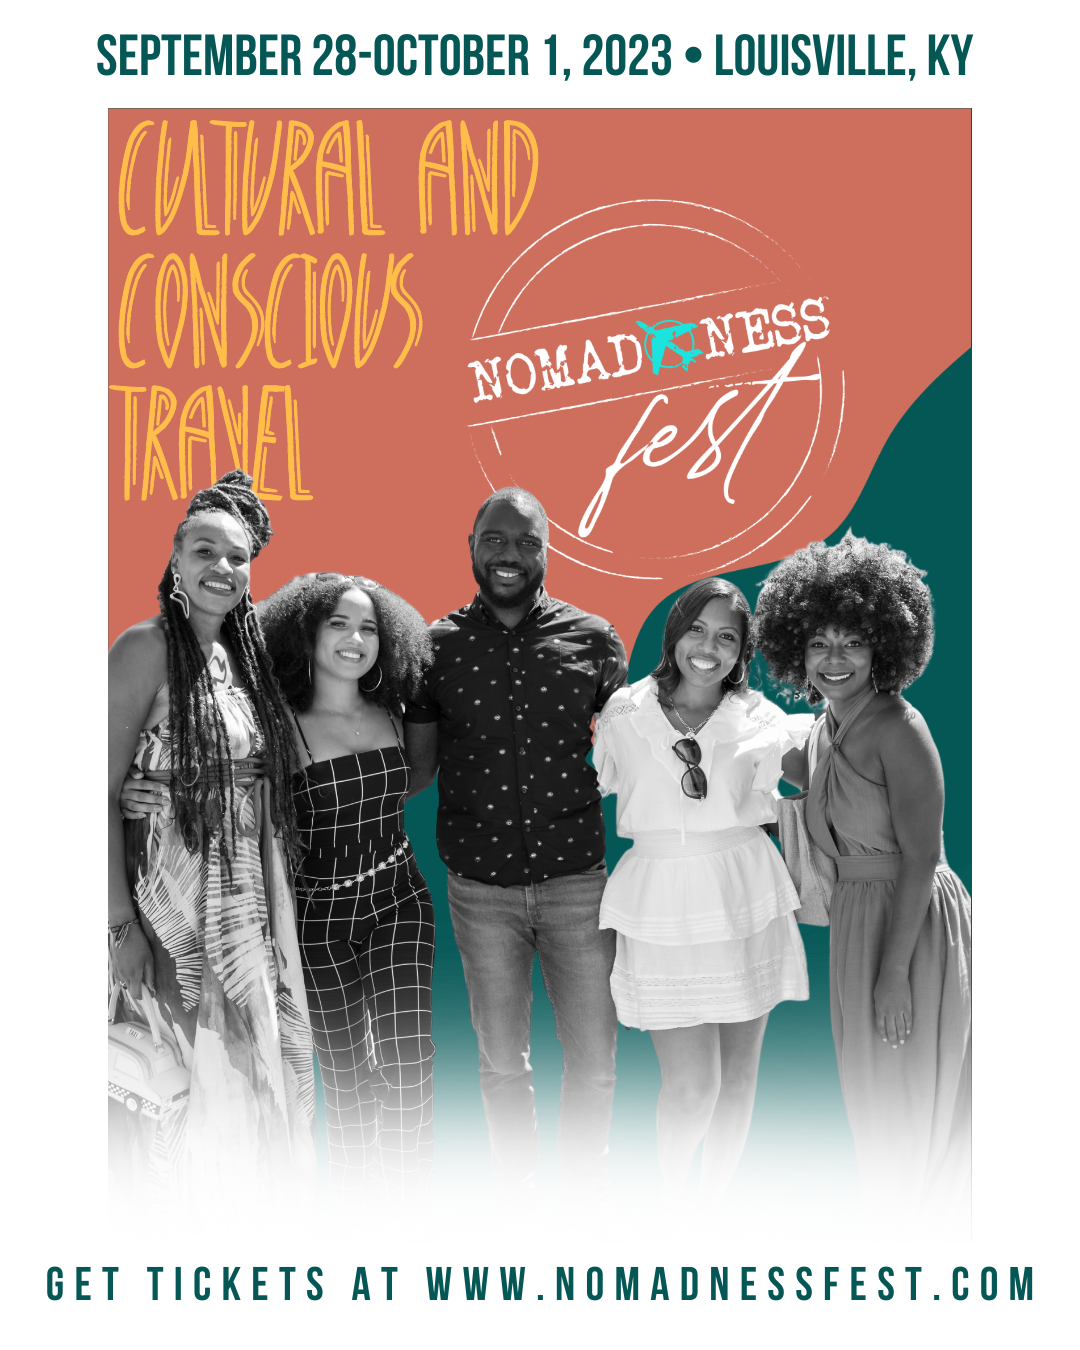 Nomadness Fest Comes To Louisville, KY This Month Travel Noire